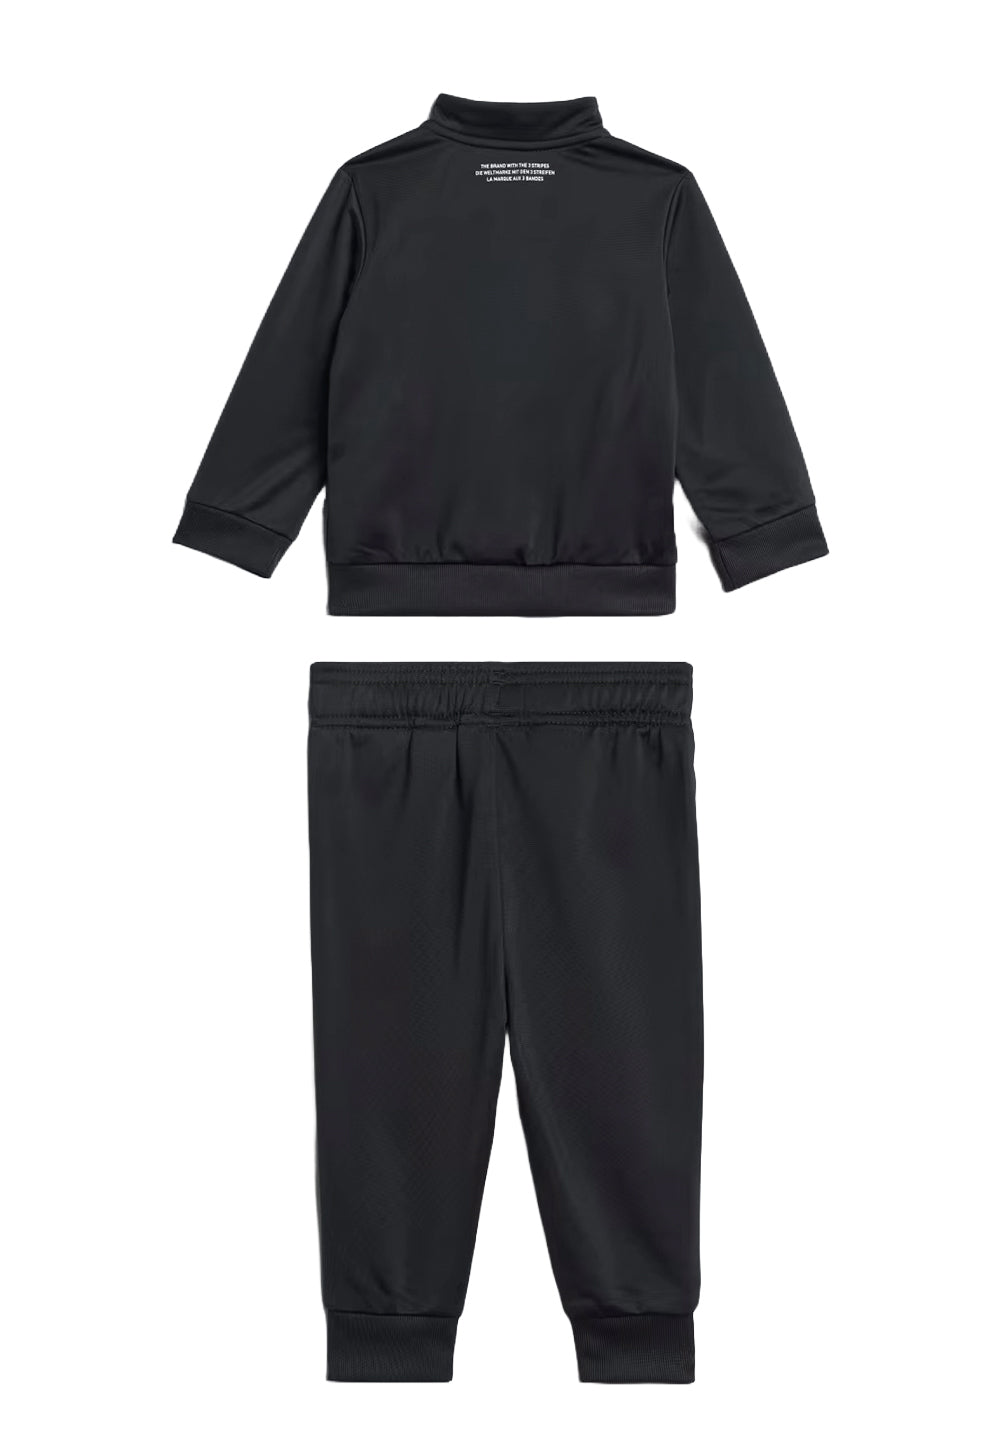 Black outfit for newborns